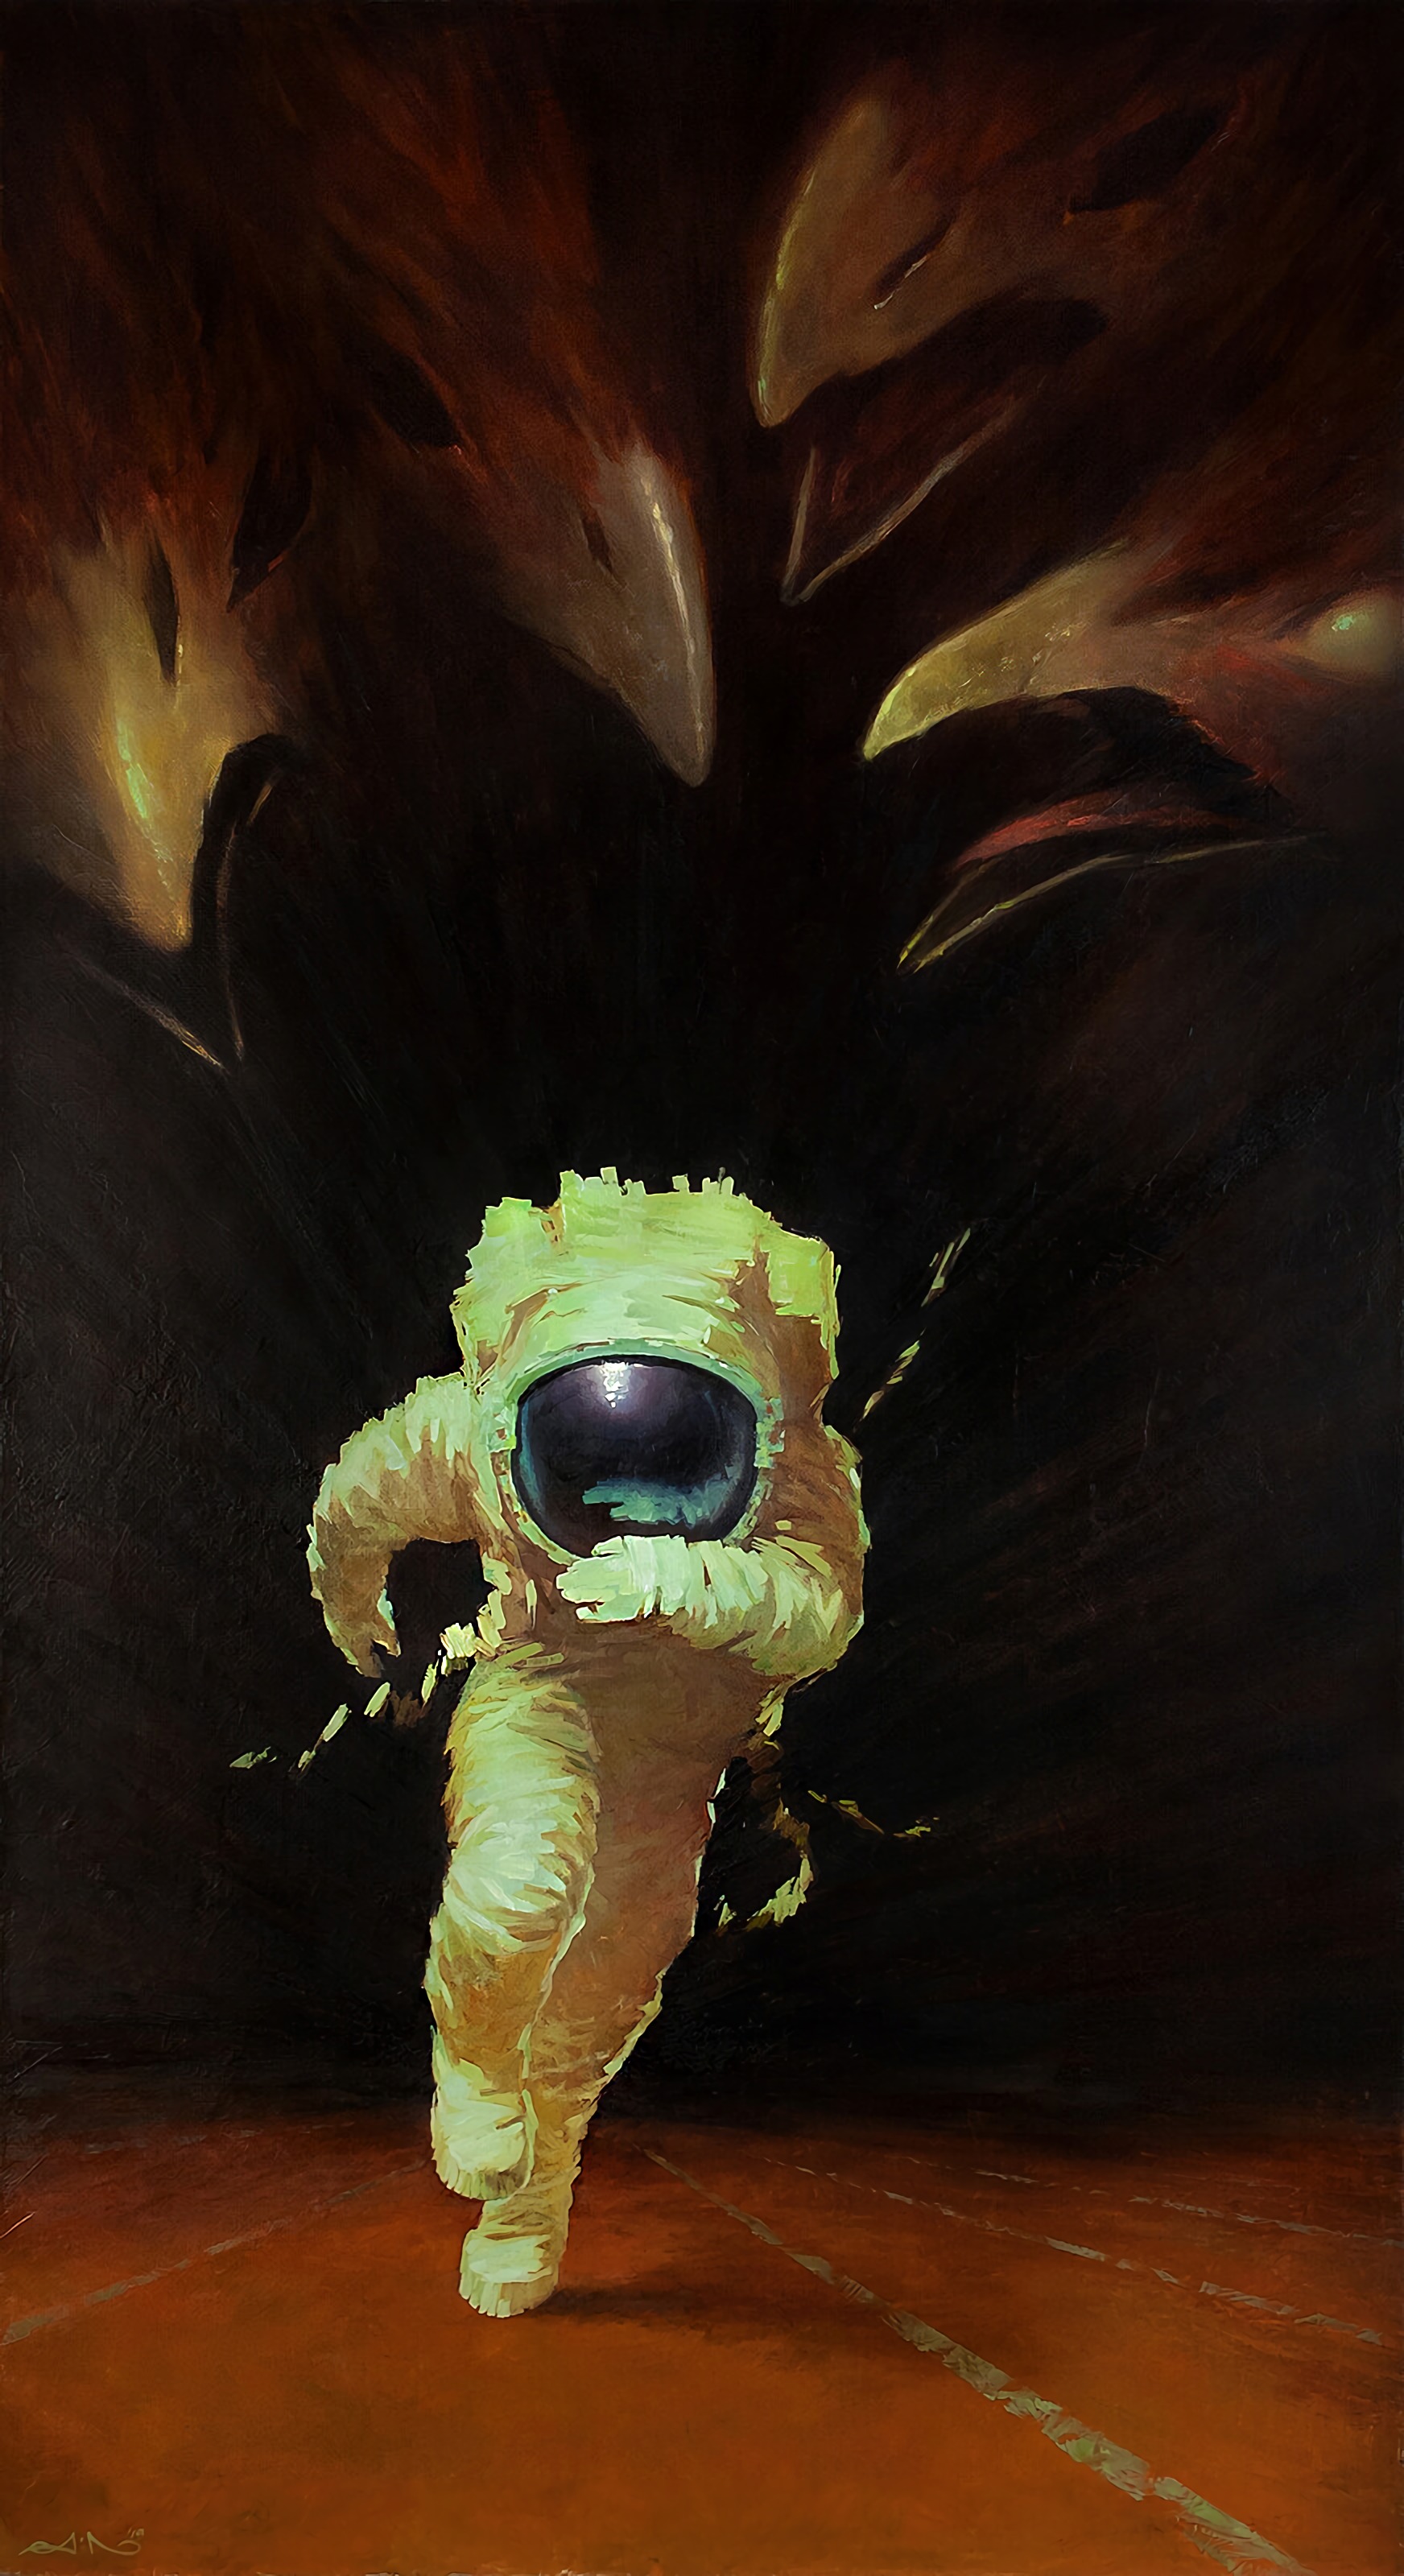 Popular Spacesuit Image for Phone